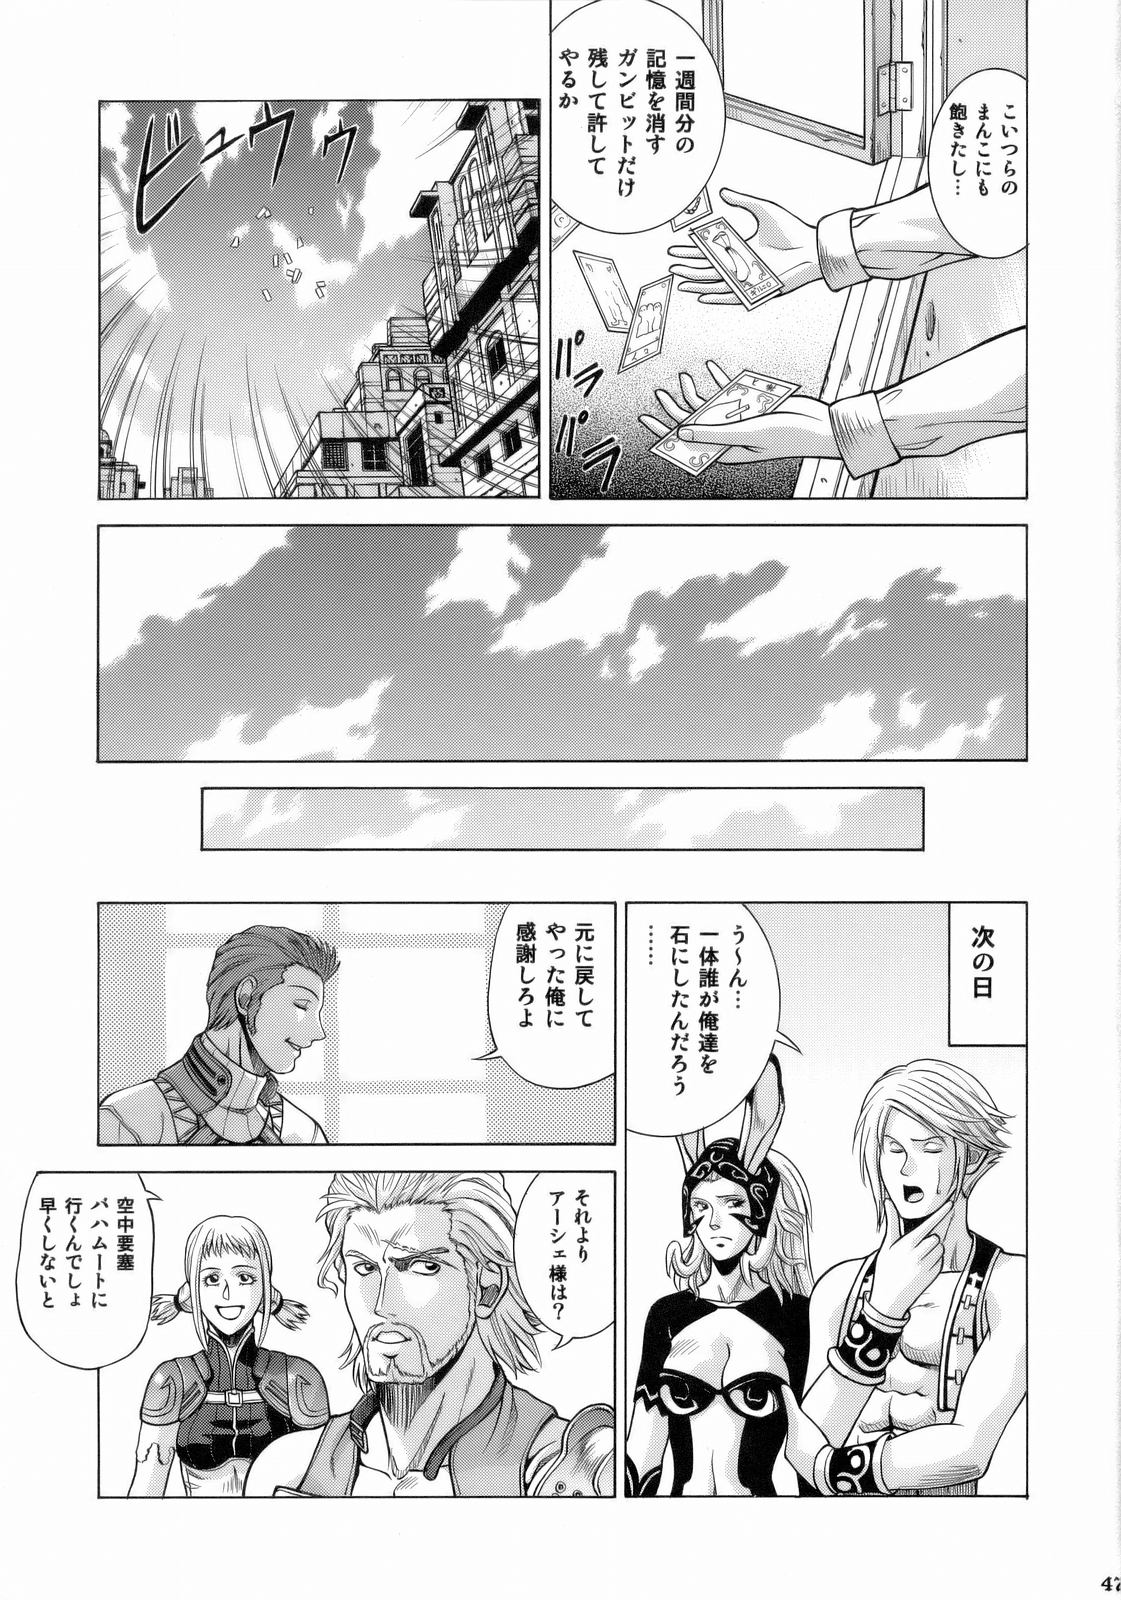 [Human High-Light Film] ASHE (Final Fantasy XII) page 46 full